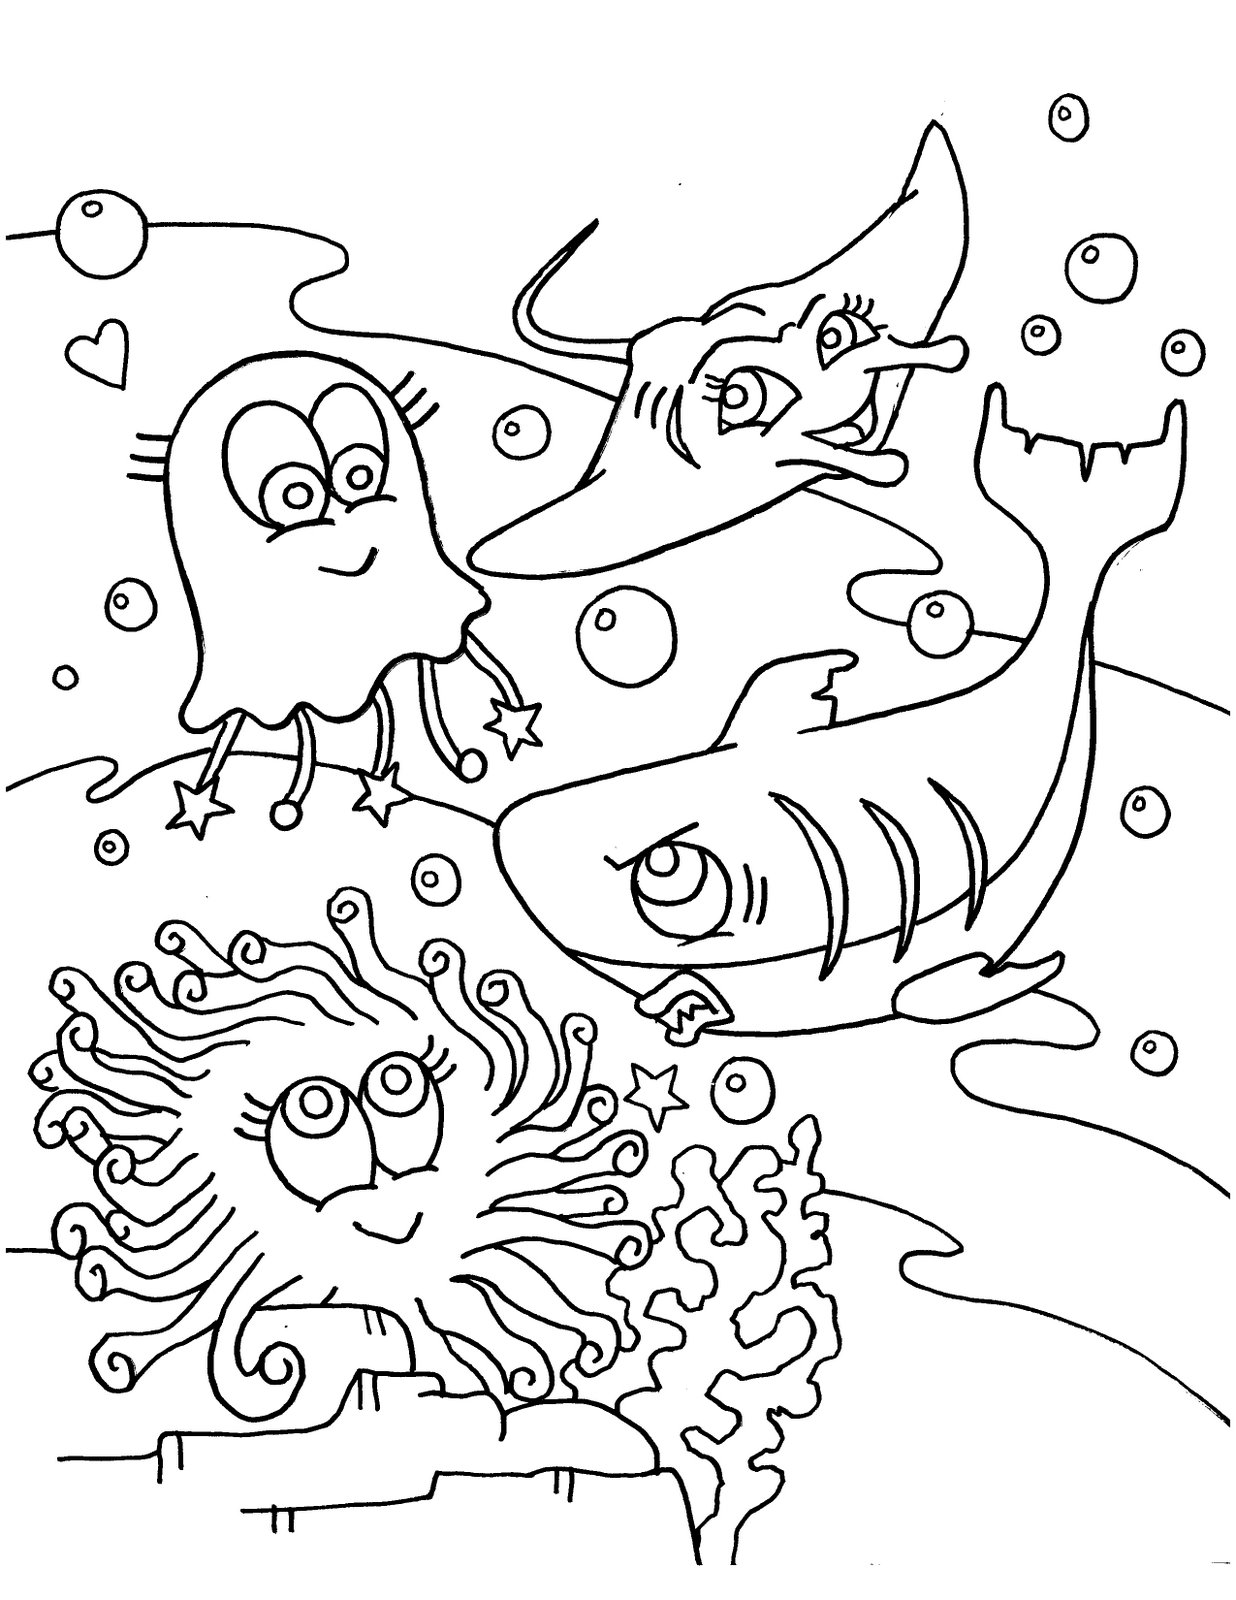 Ocean coloring pages to download and print for free